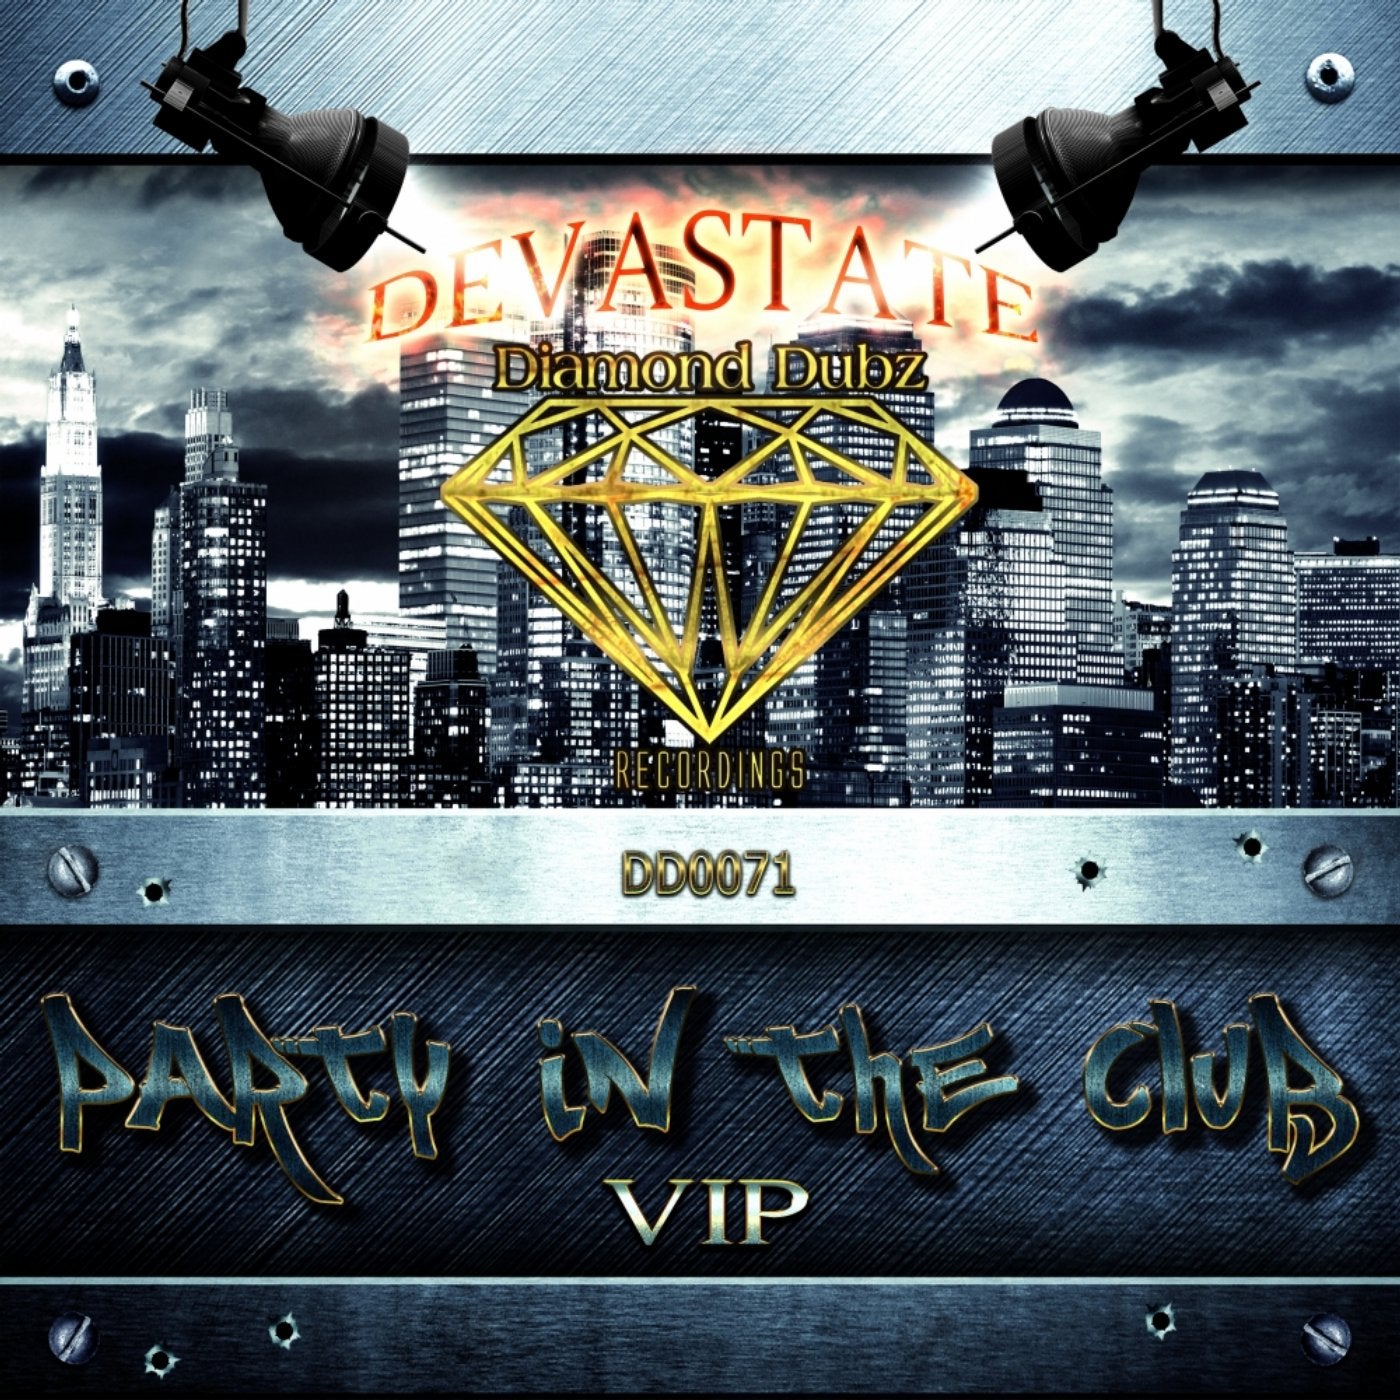 Party In The Club (VIP) (Devastate Remix)